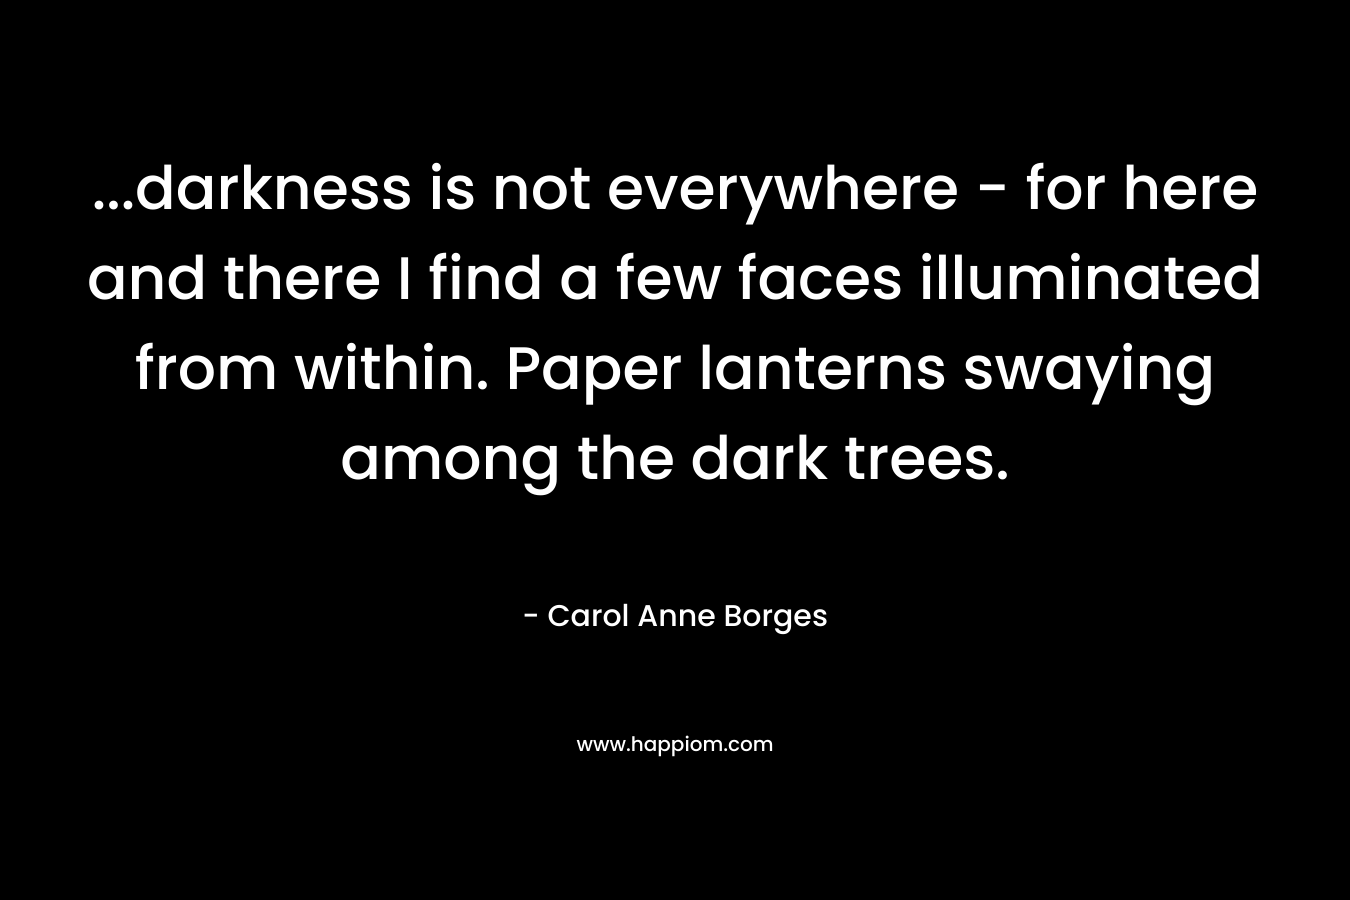 …darkness is not everywhere – for here and there I find a few faces illuminated from within. Paper lanterns swaying among the dark trees. – Carol Anne Borges